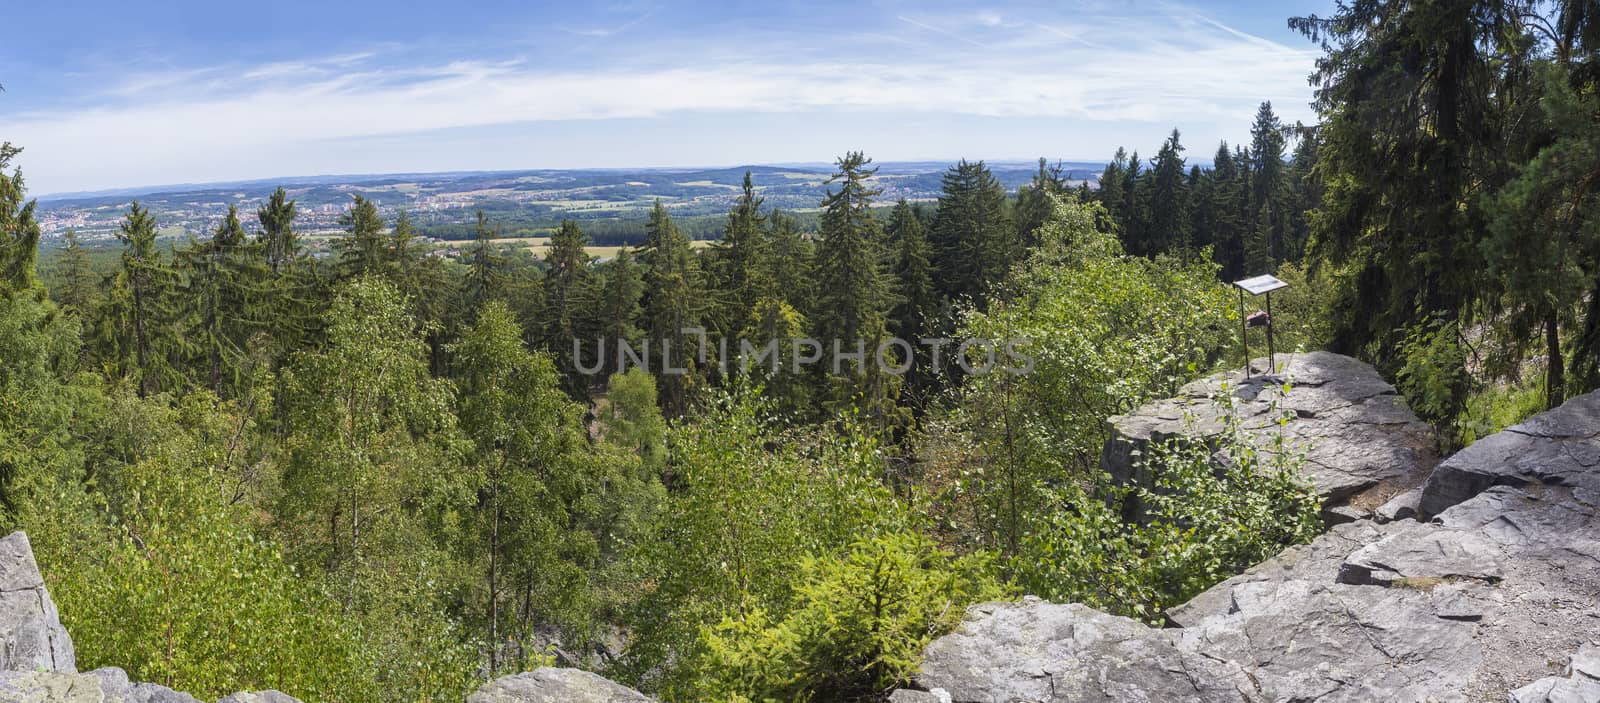 Panoramic view from look out in Brdy mountain hills, with green trees, rocks town and blue sky, Czech Republic by Henkeova